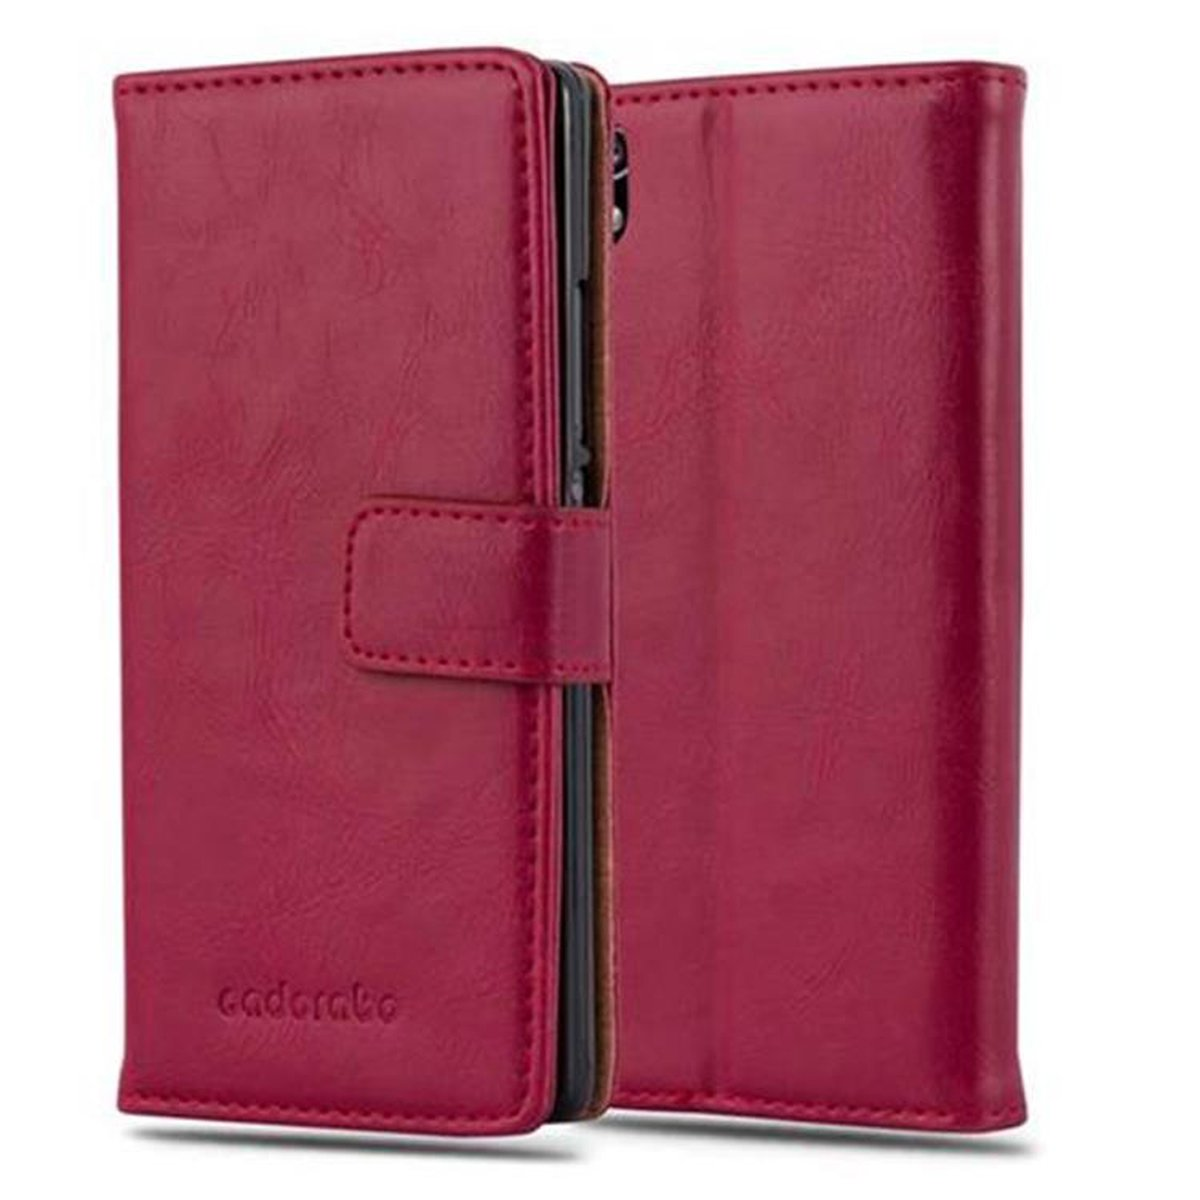 Book Luxury P7, Huawei, WEIN Bookcover, ASCEND Style, ROT CADORABO Hülle